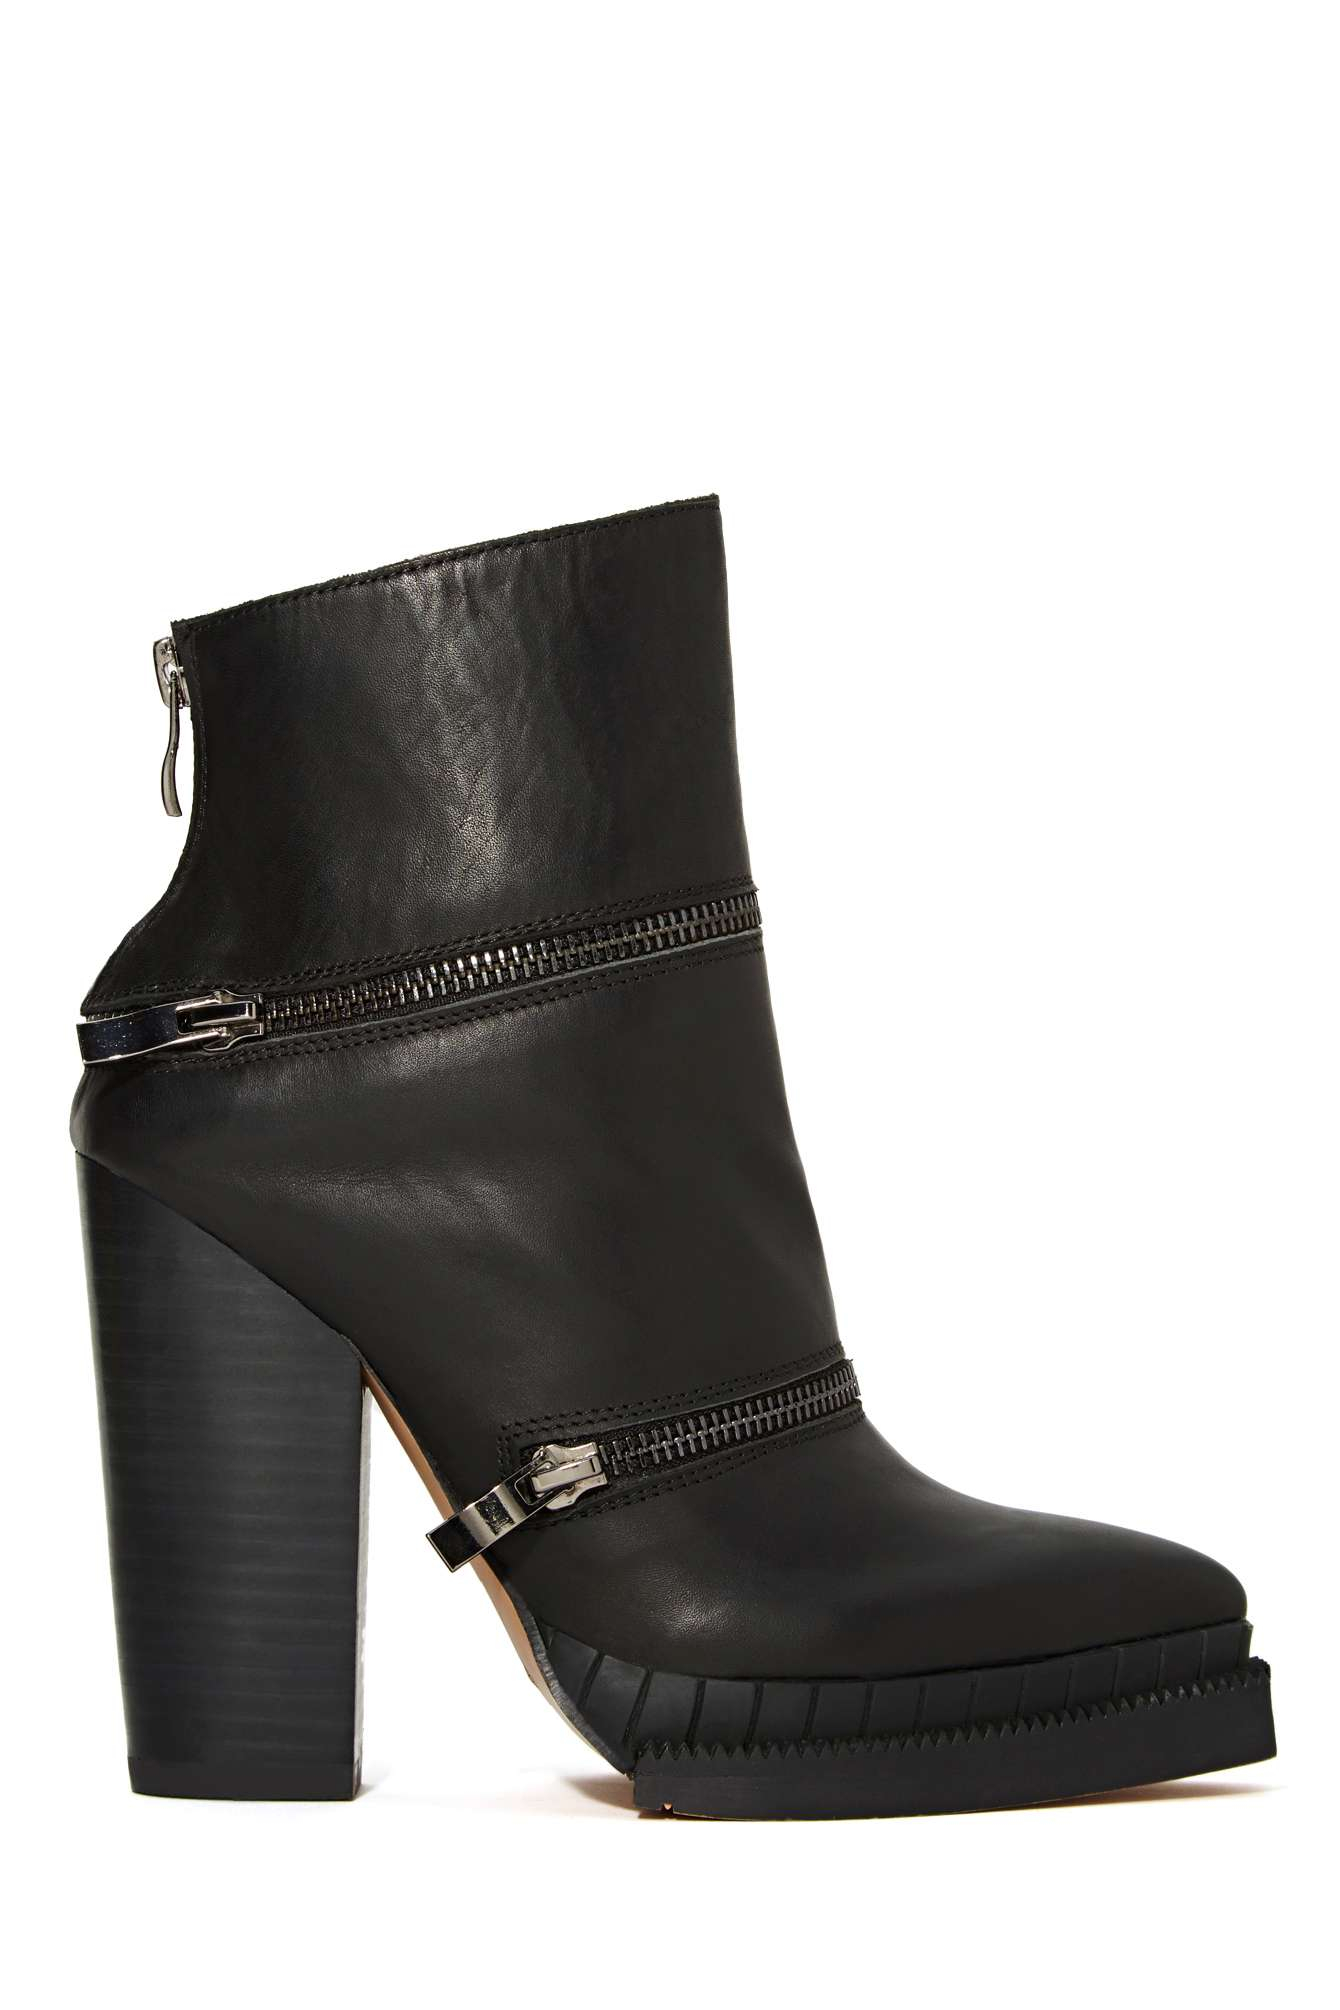 Nasty gal Section-3 Boot in Black | Lyst